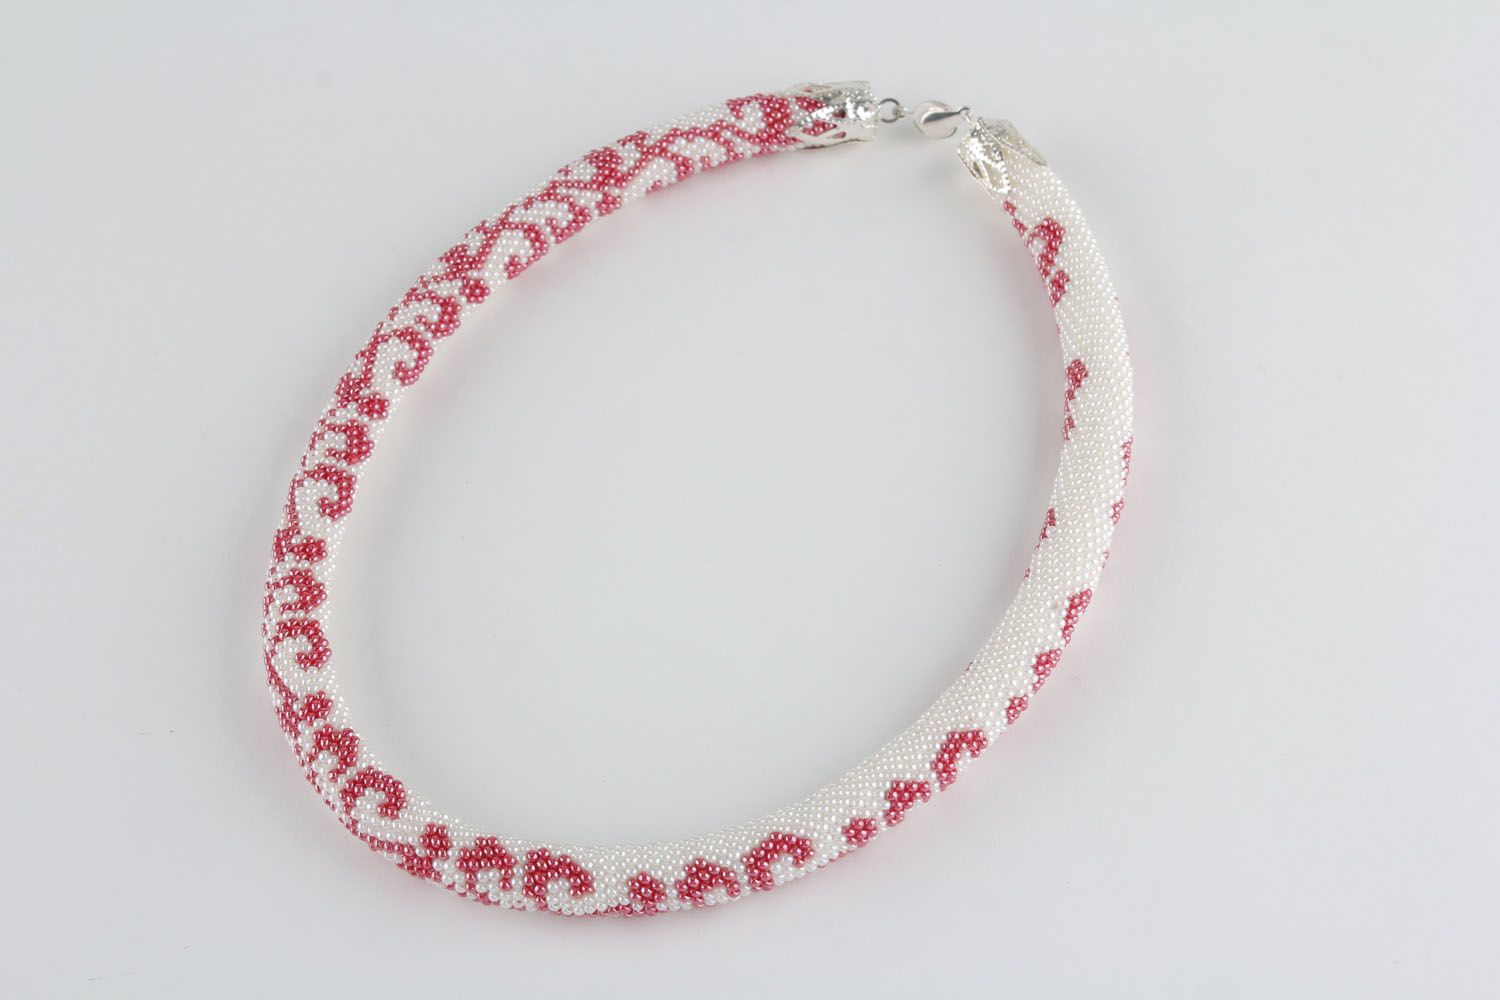 Homemade white beaded cord necklace photo 2